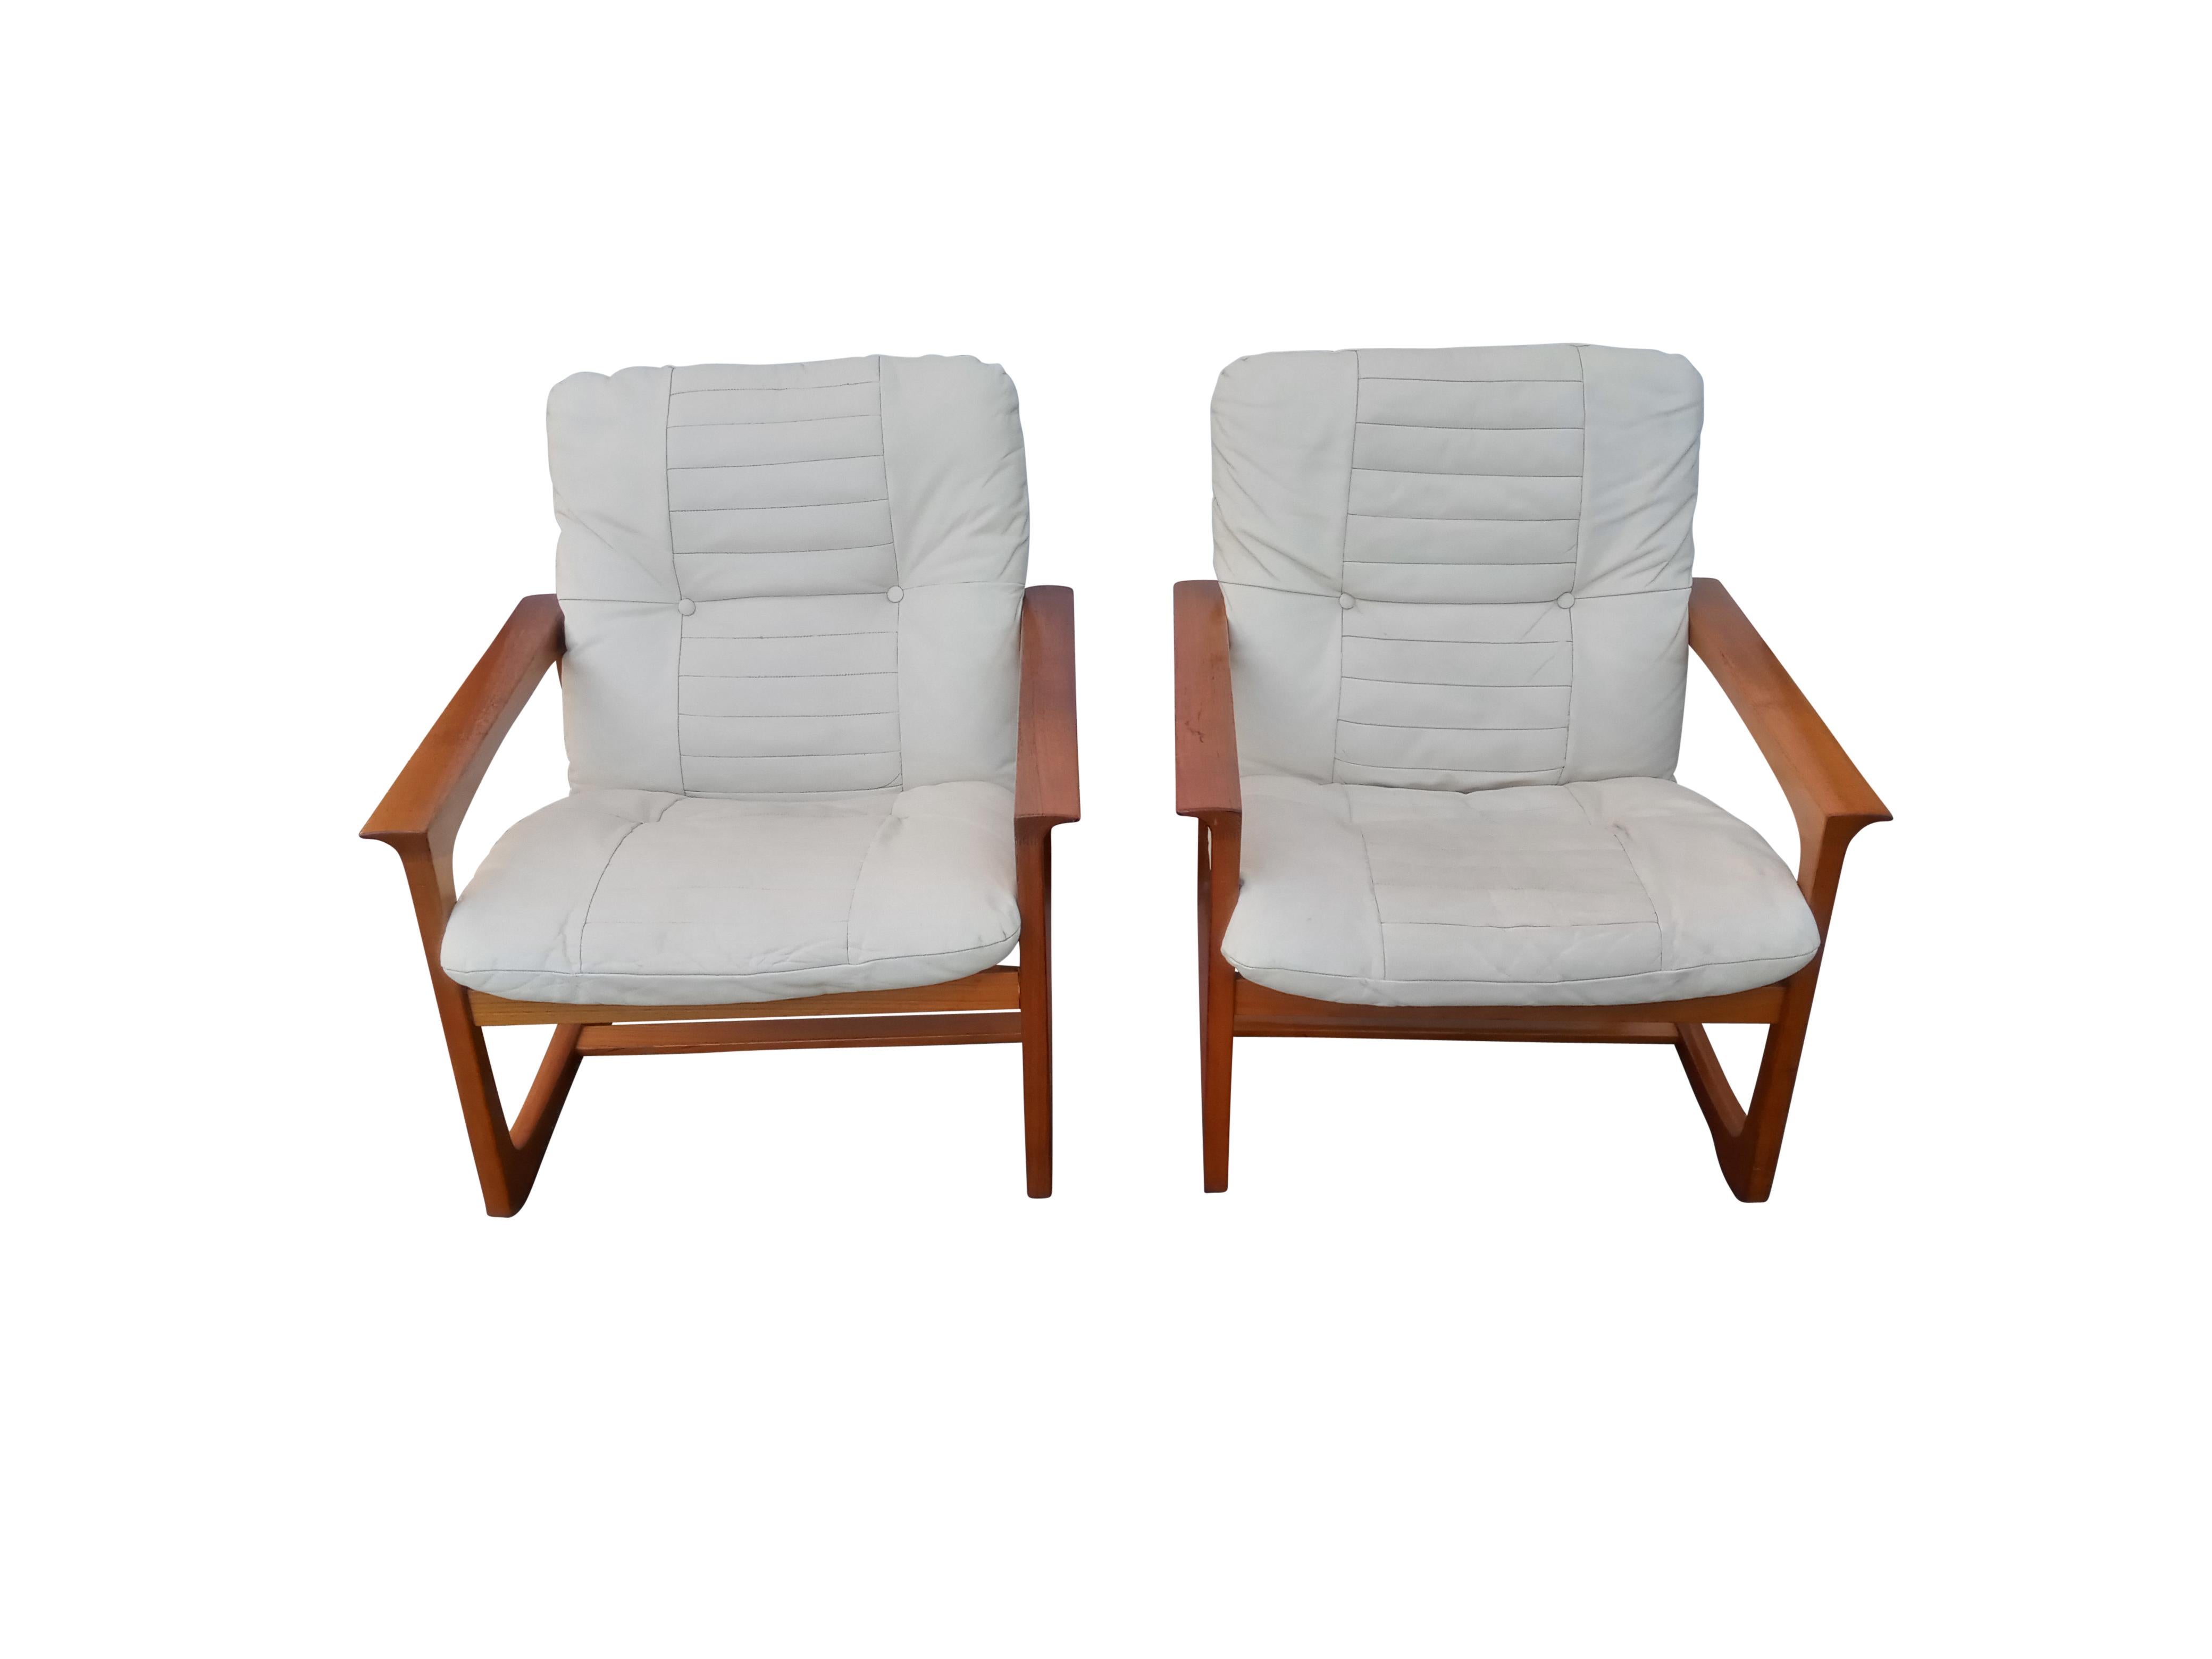 This pair of attractive teak and tailored leather cushions lounge chairs are as comfortable as they are good-looking. Made in Norway in the 1970s by Lied Mobler, the production quality of these chairs is very high. There is a rich, warm patina to